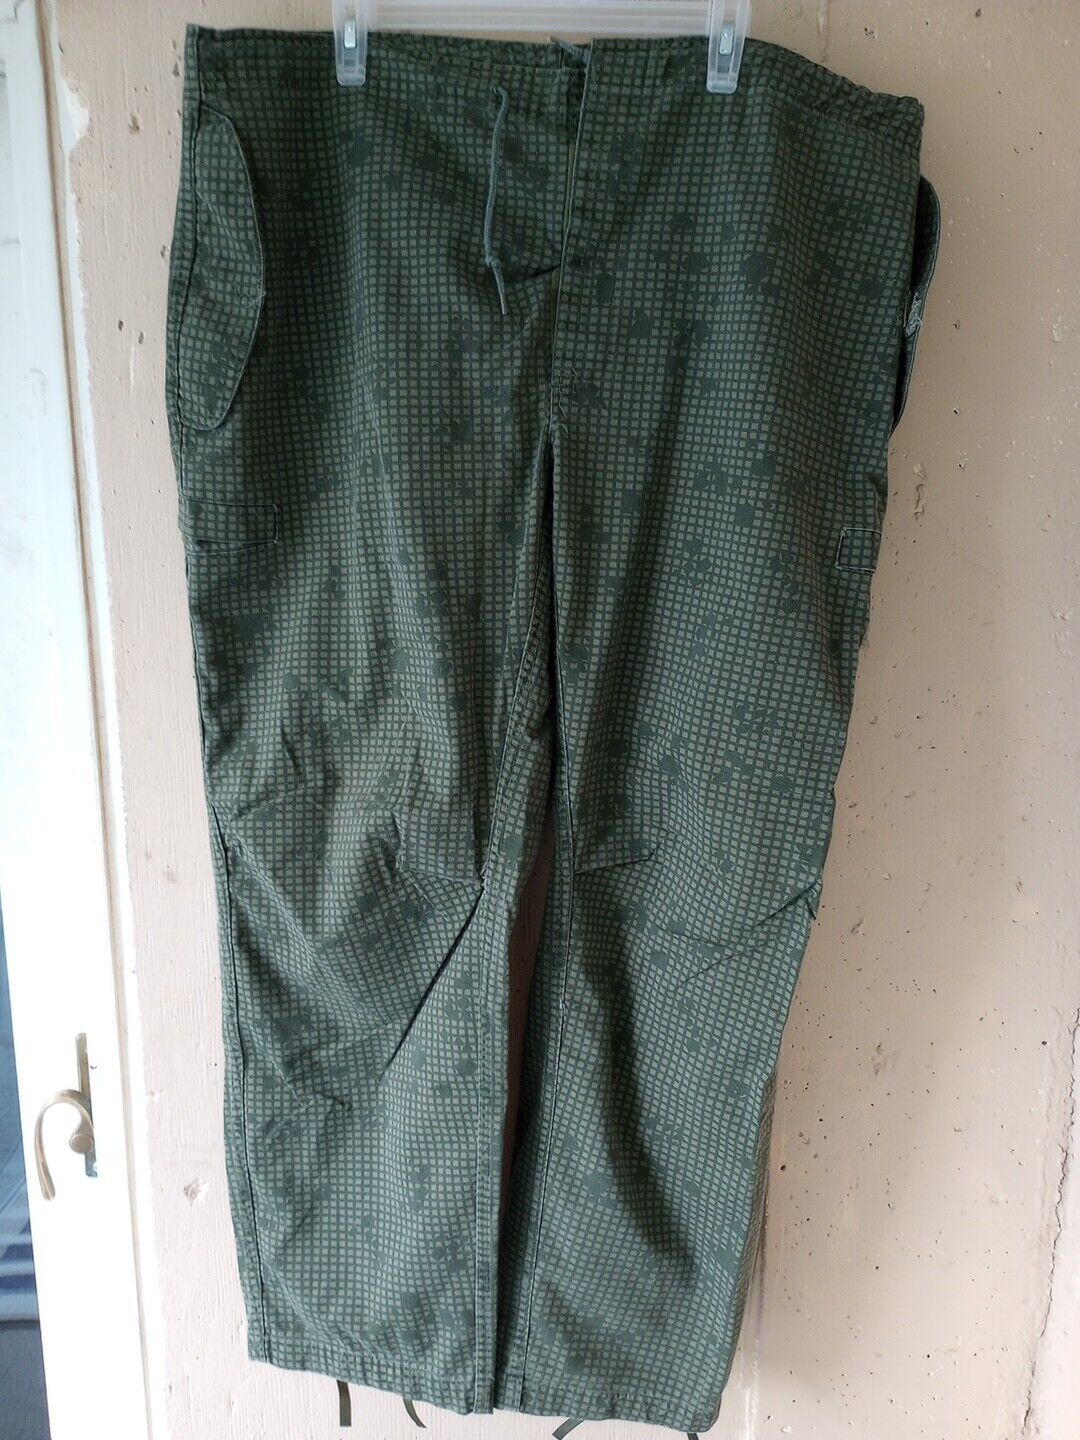  US Military Night Desert Camouflage Over Pants Size X Large Long 